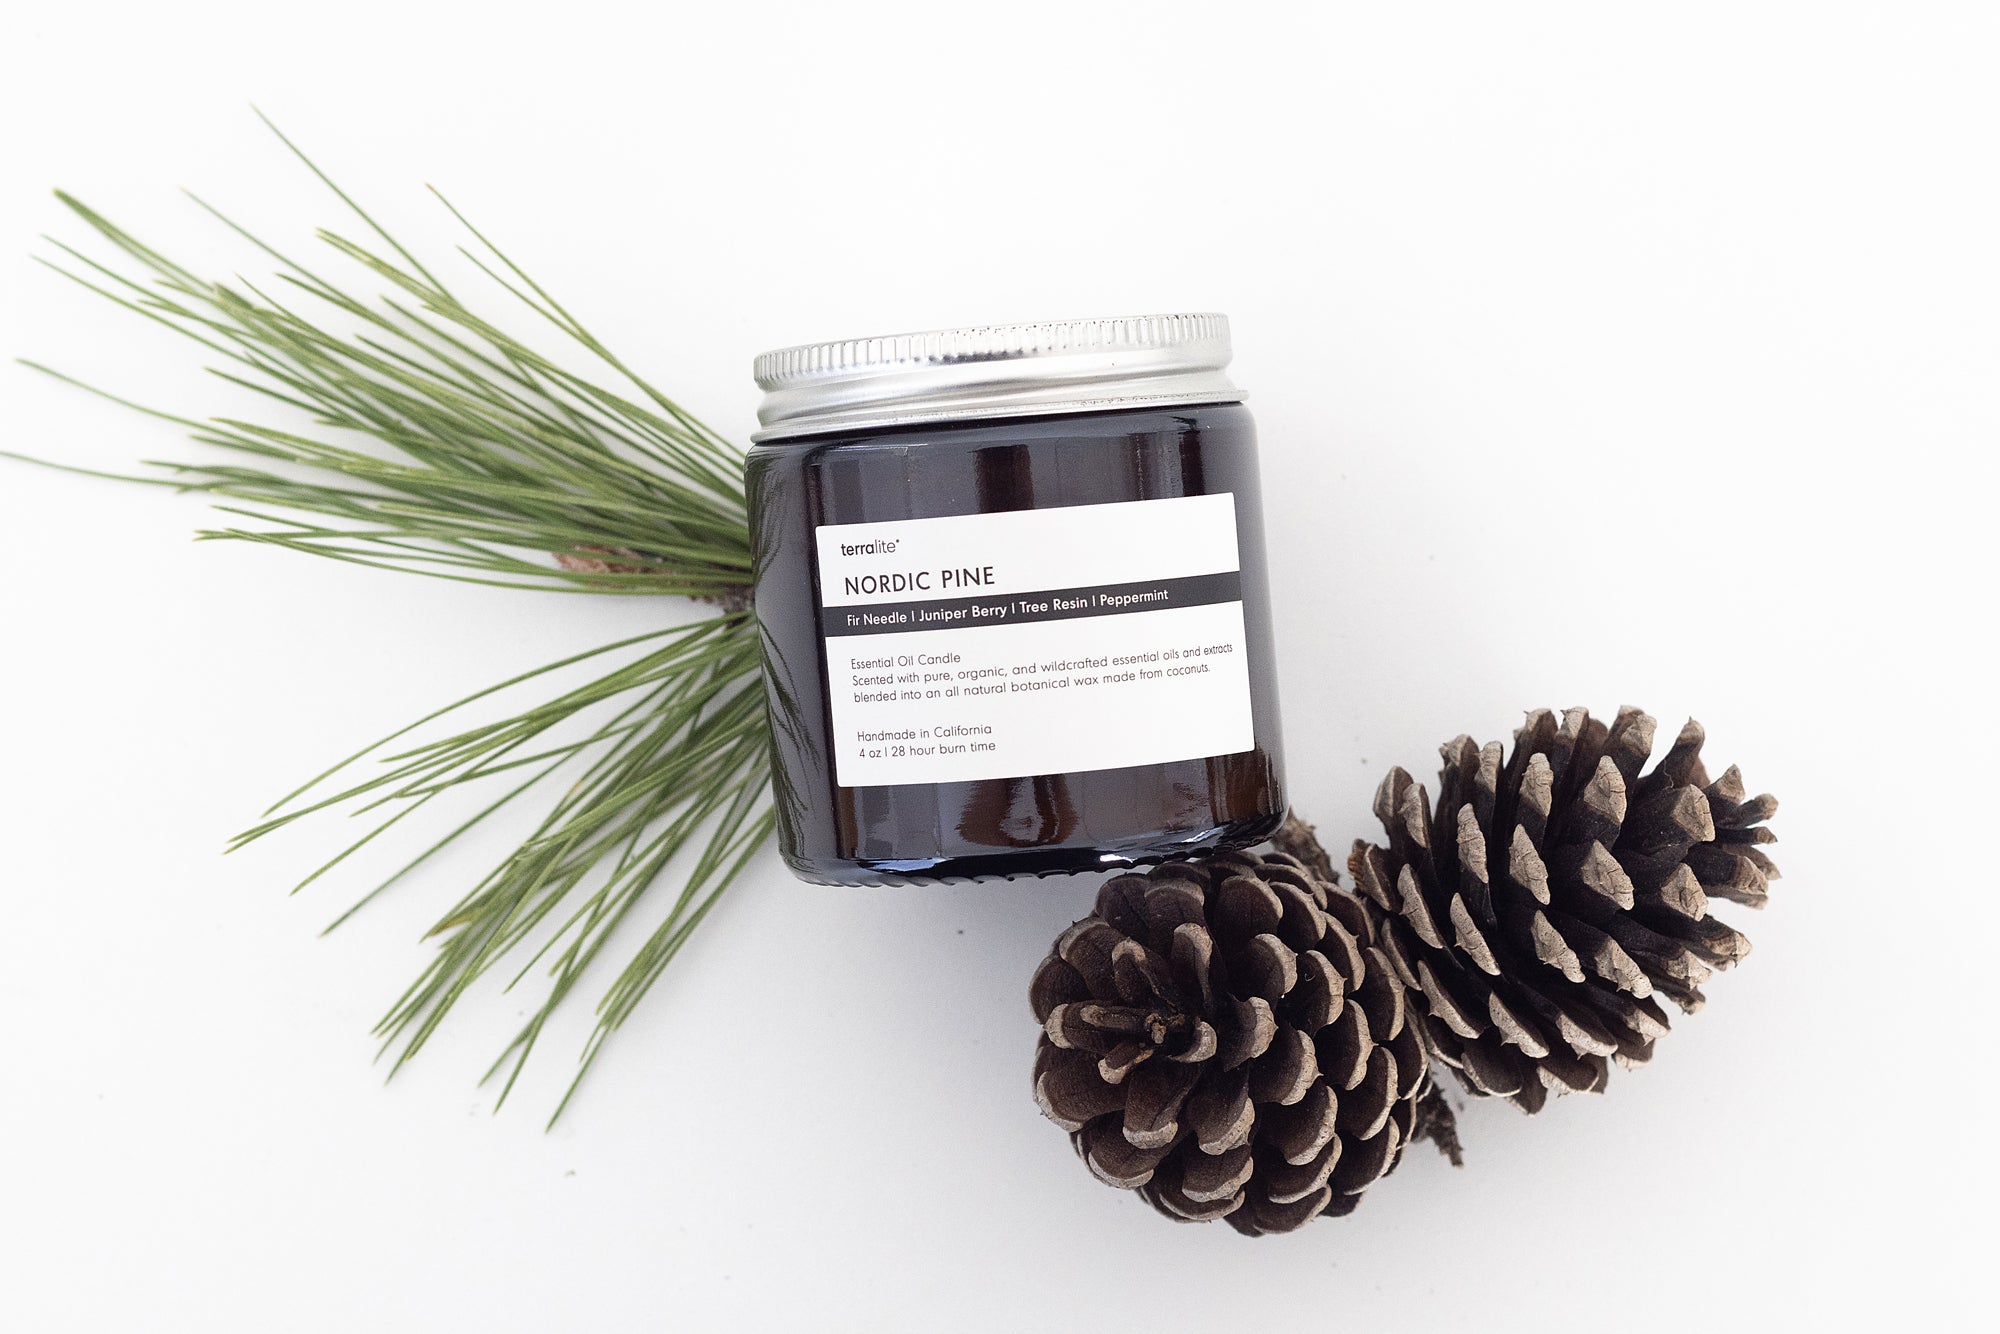 Nordic Pine Essential Oil Candle - 4 oz. made with Fir Needle, Juniper Berry, Tree Resin, and Organic Peppermint.